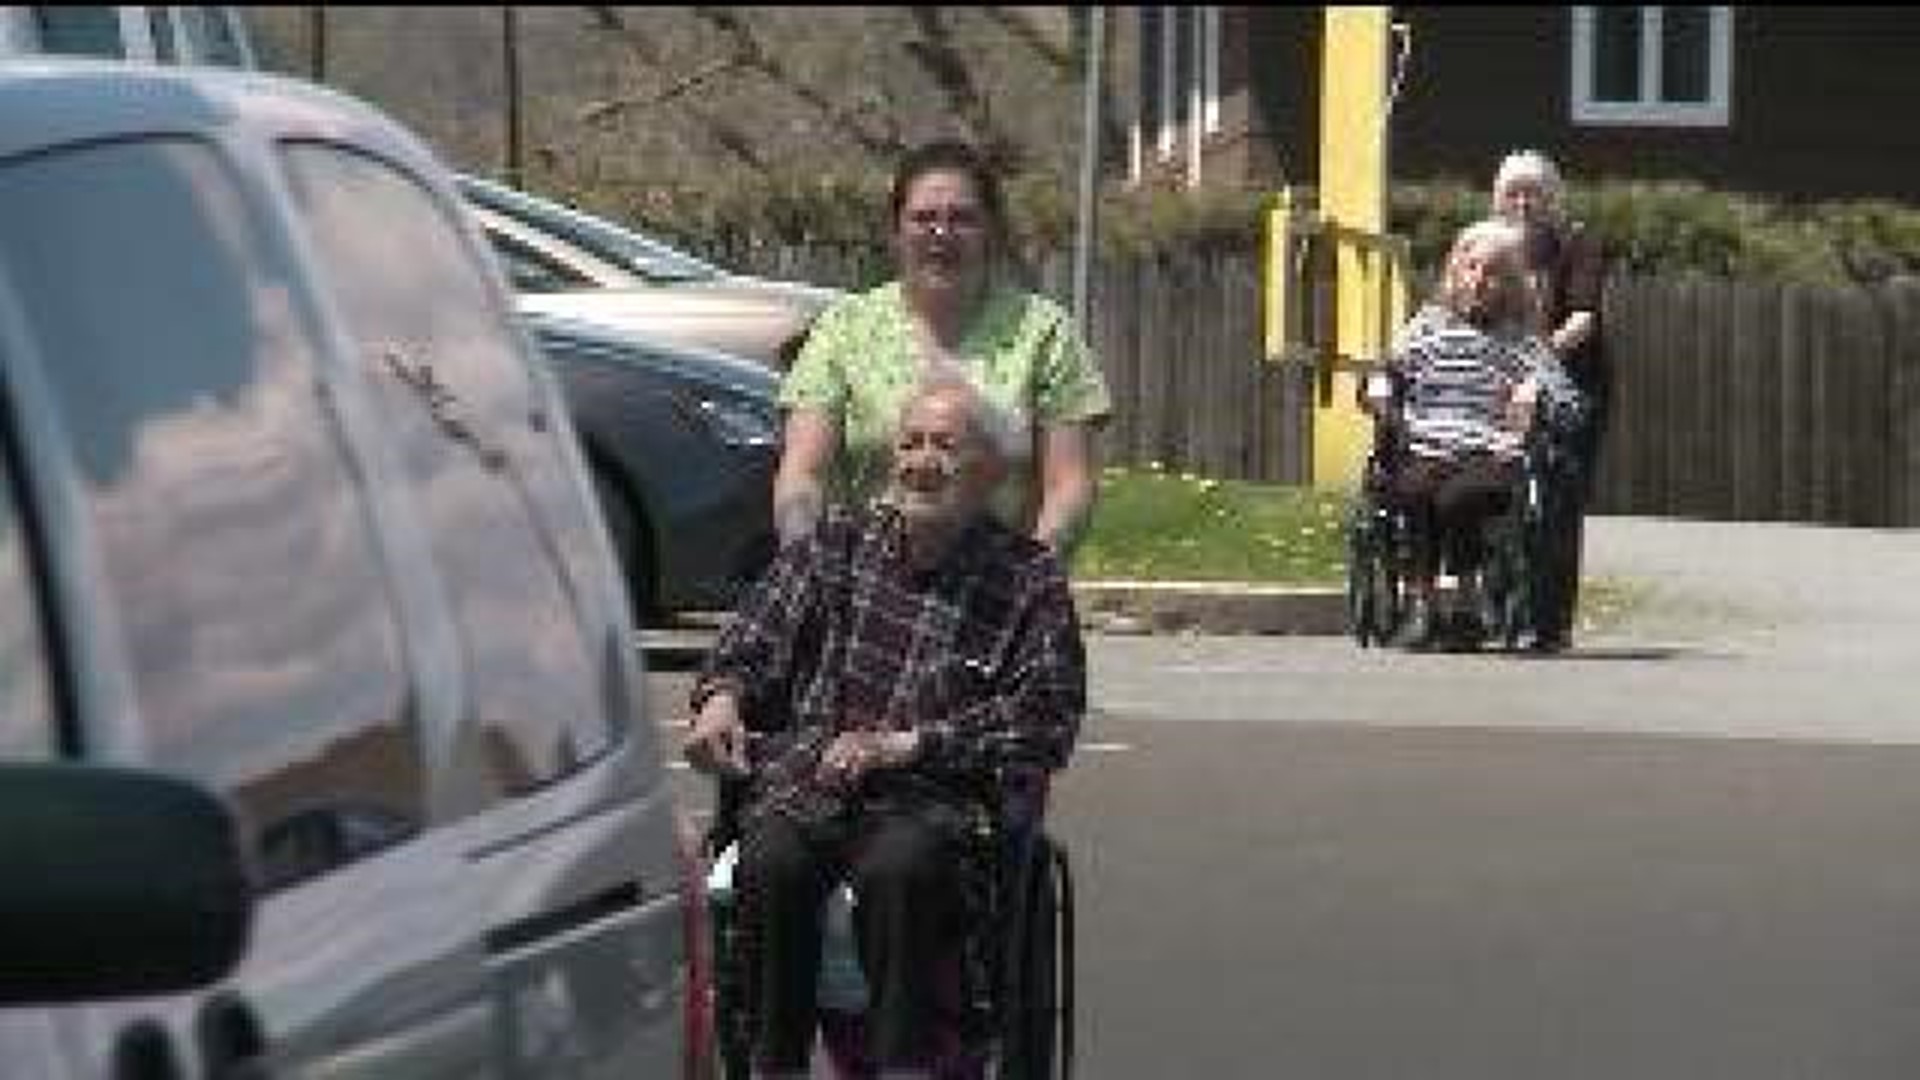 Care Home Residents Still Unable To Go Home